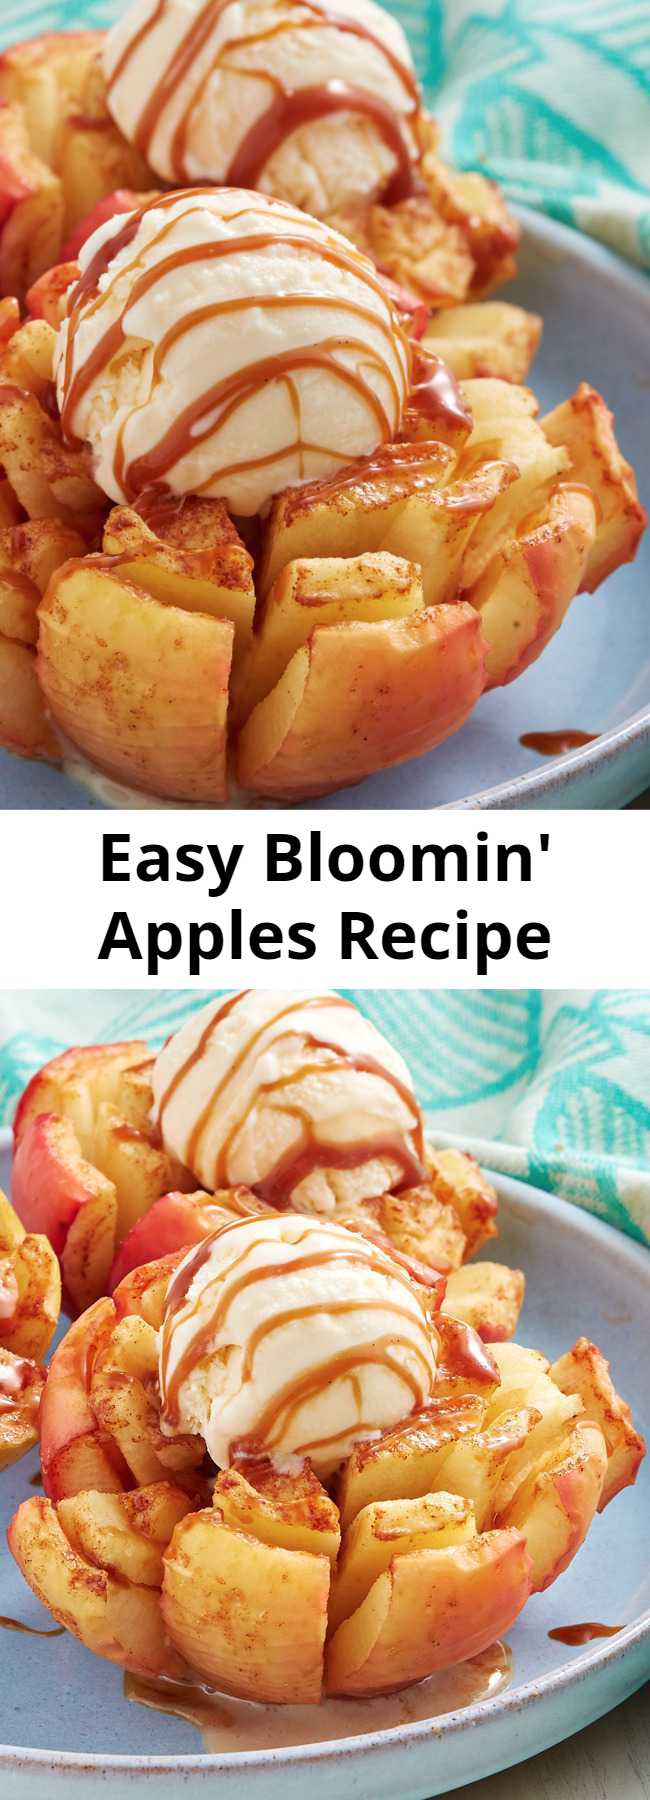 Easy Bloomin' Apples Recipe - We took inspo from the ever popular bloomin' onion and made a just as fun dessert. Though these finished bloomin' apples look insane, they're actually quite easy to make. Because apples can turn brown really quickly, you'll want to brush them with butter and get them in the oven pretty quickly after slicing them. If you want to take your time, squeeze lemon juice all over the cut side to prevent browning. These are also so fun to make in the air fryer!